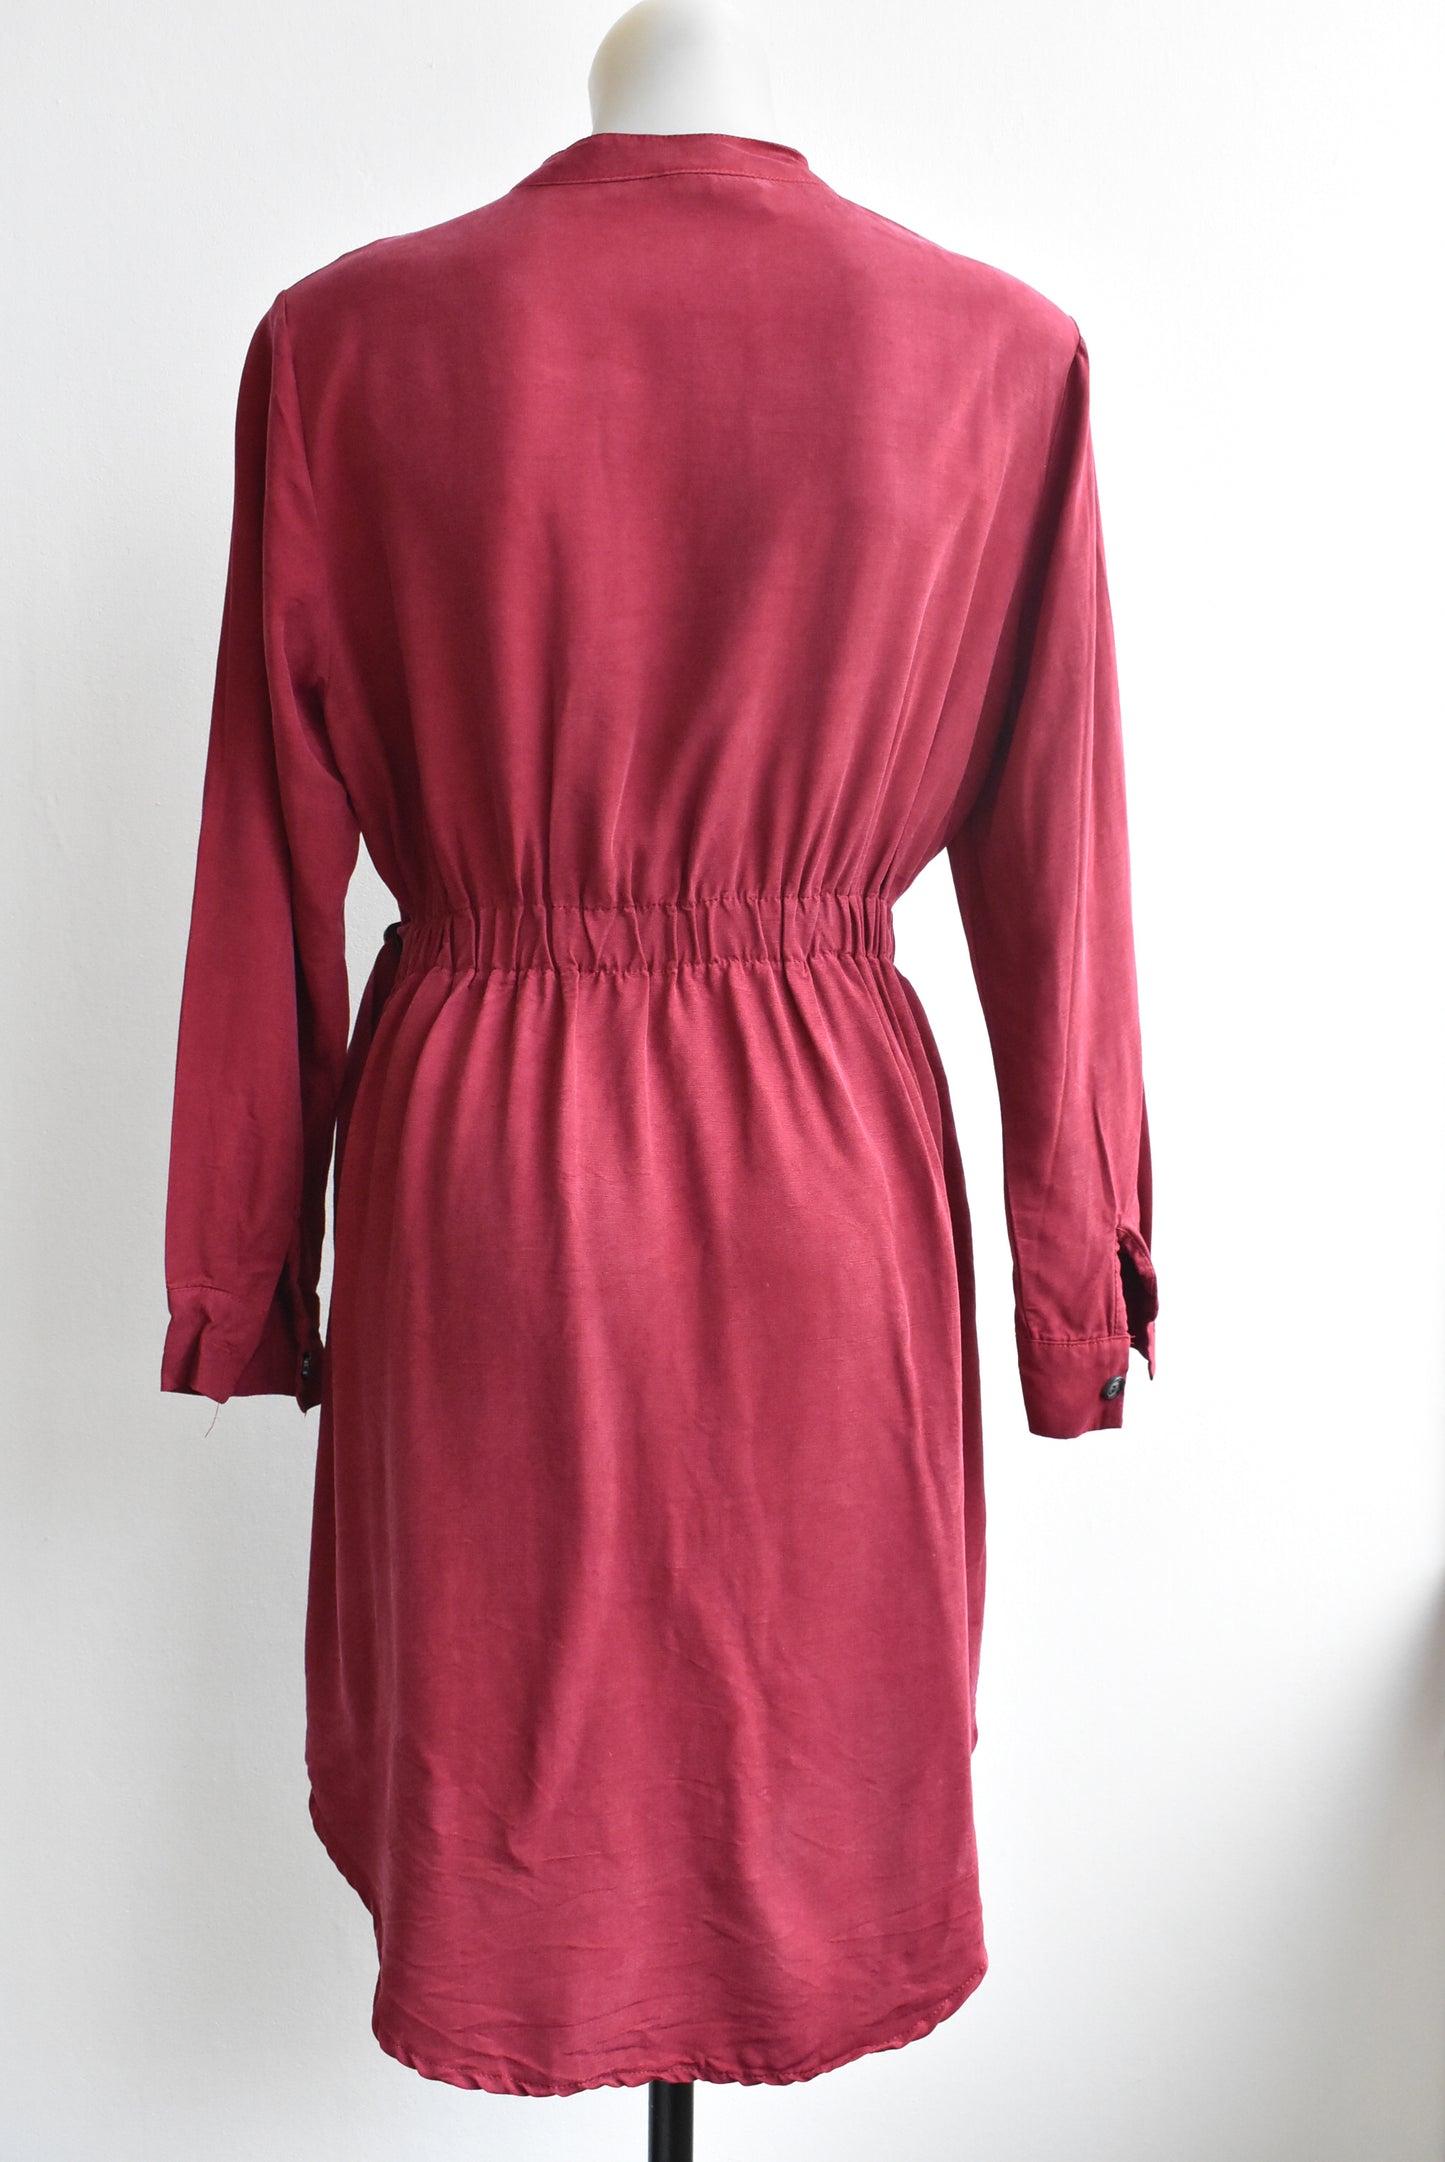 MJS red belted robe/dress, size L